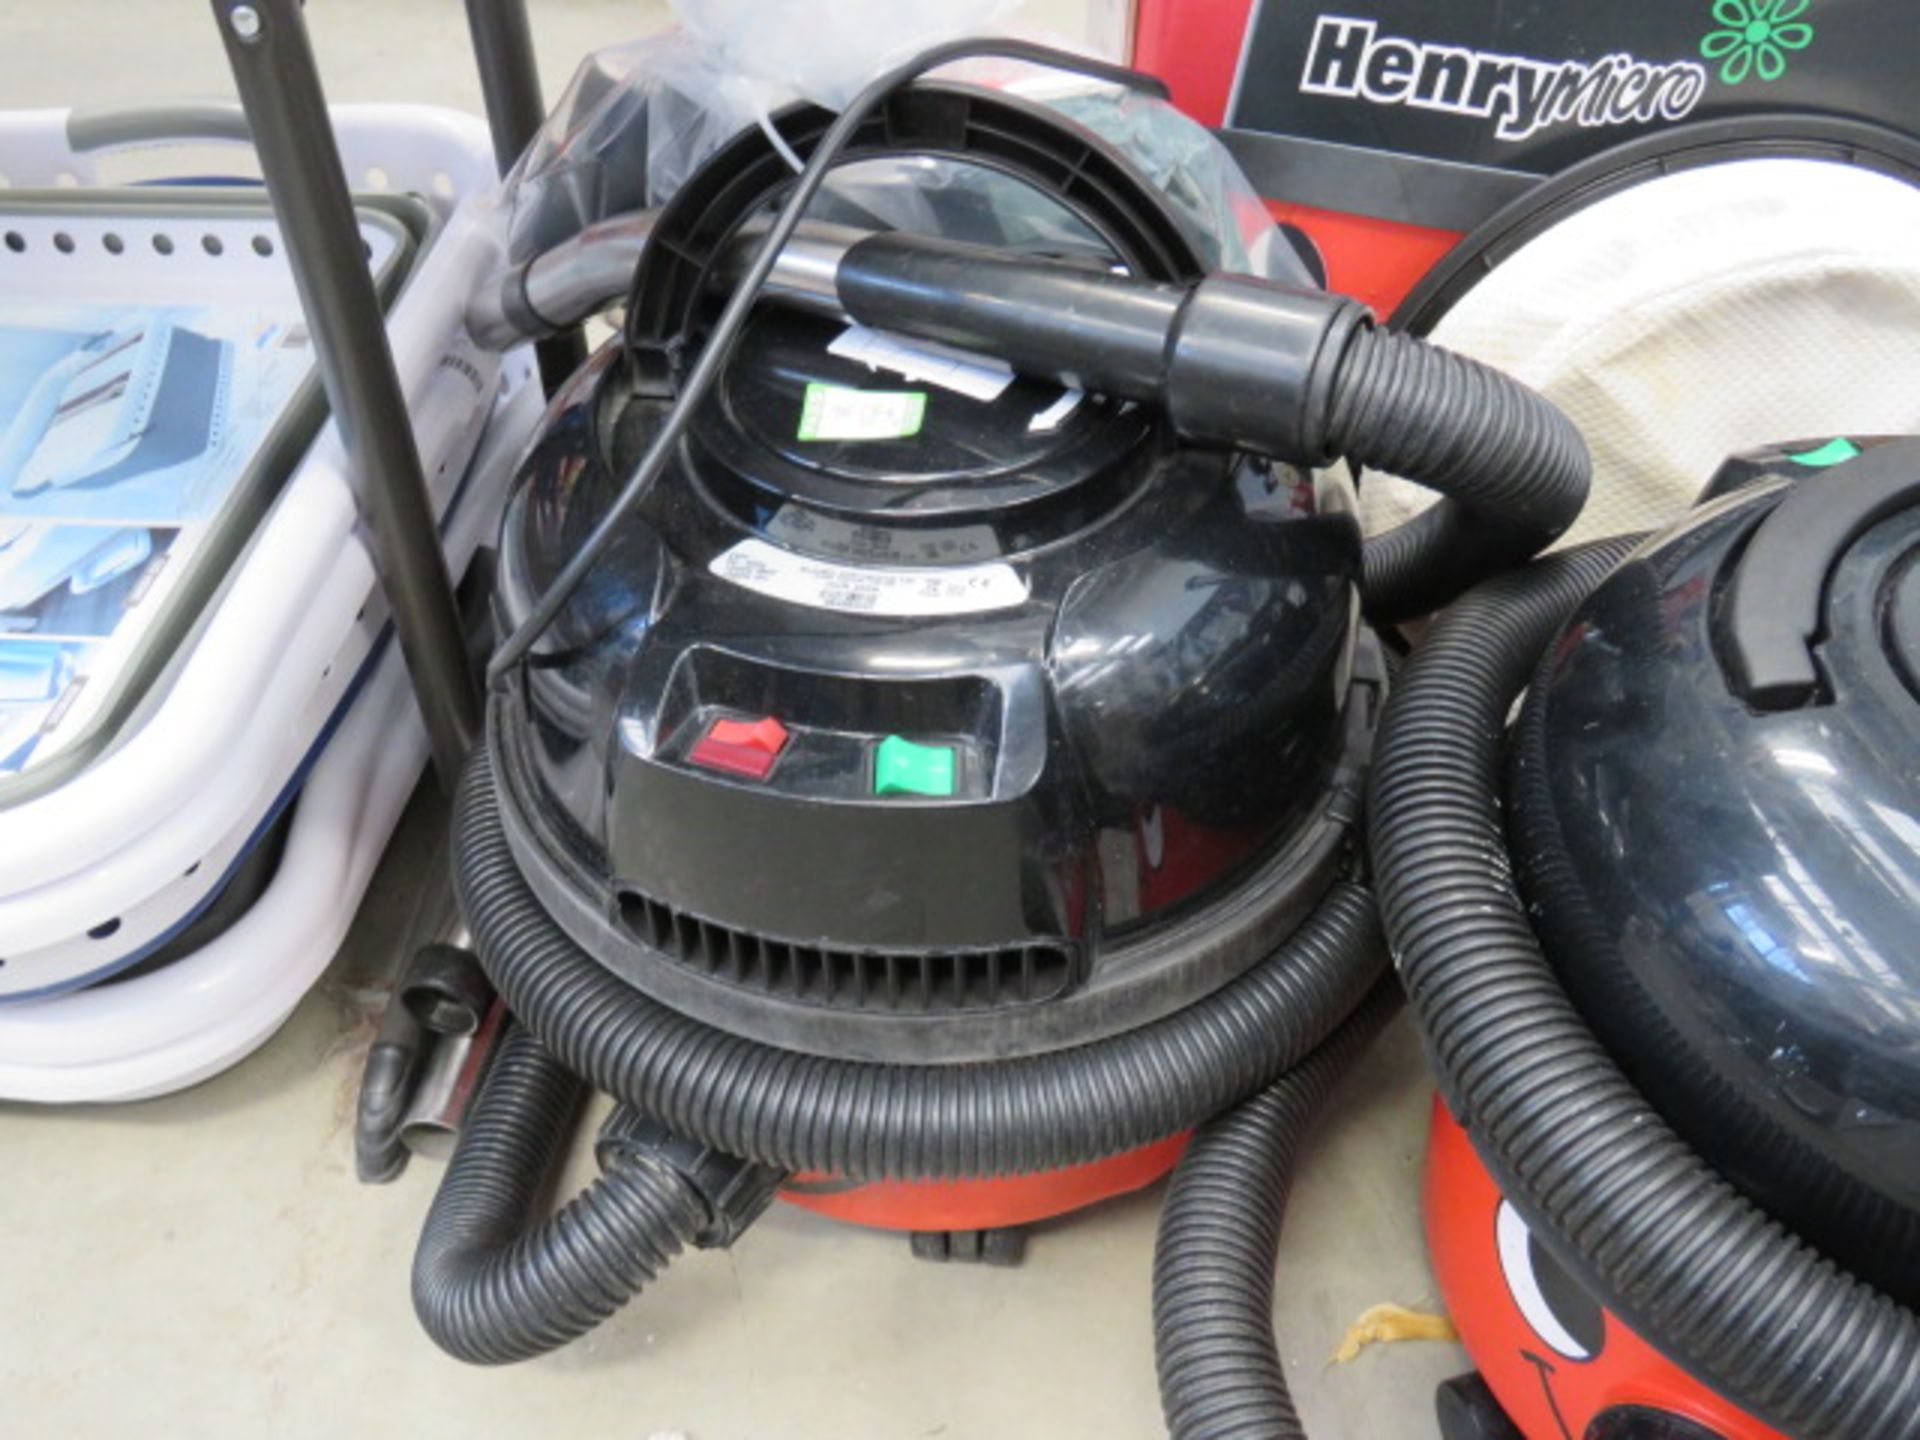 Henry vacuum cleaner with pole